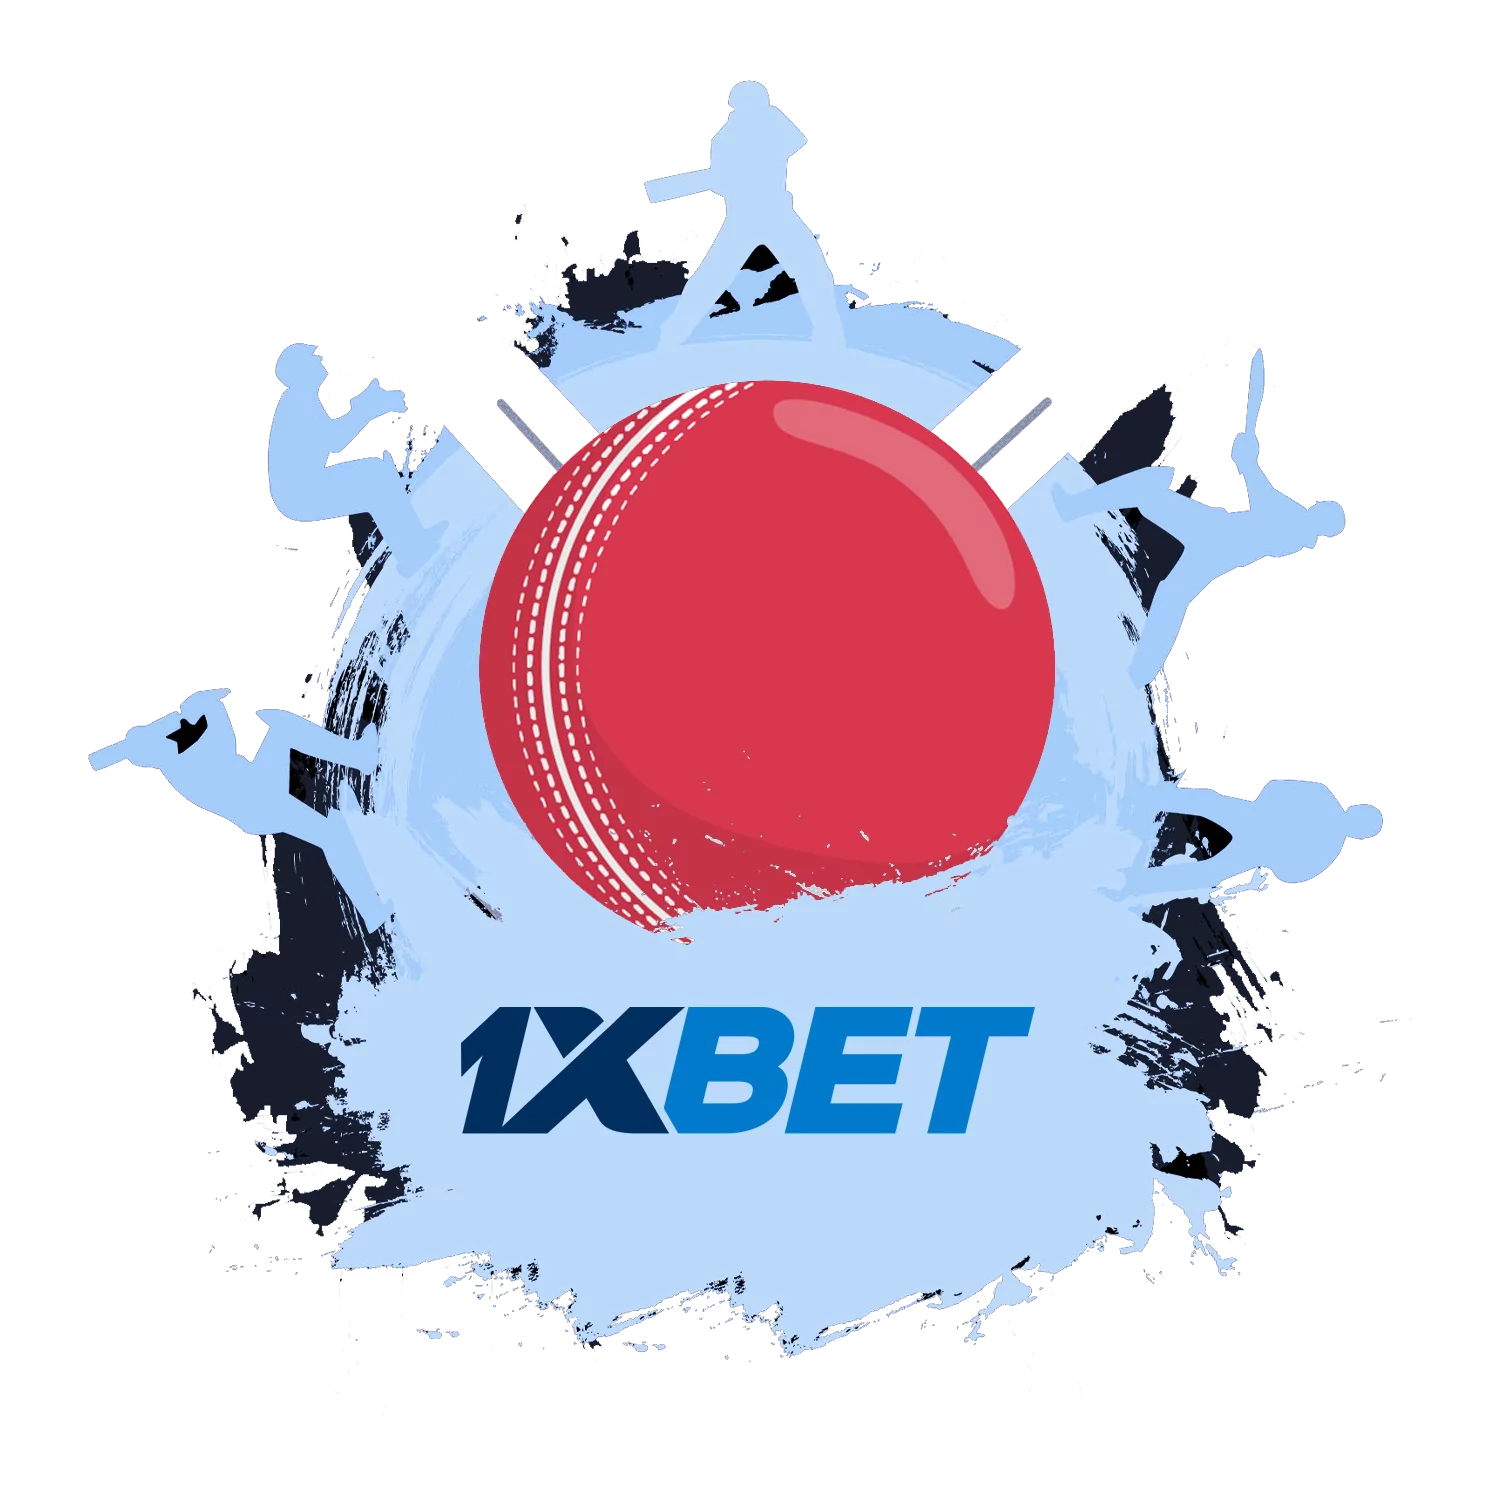 1XBET Your Ultimate Destination for Sports Betting and Online Gaming